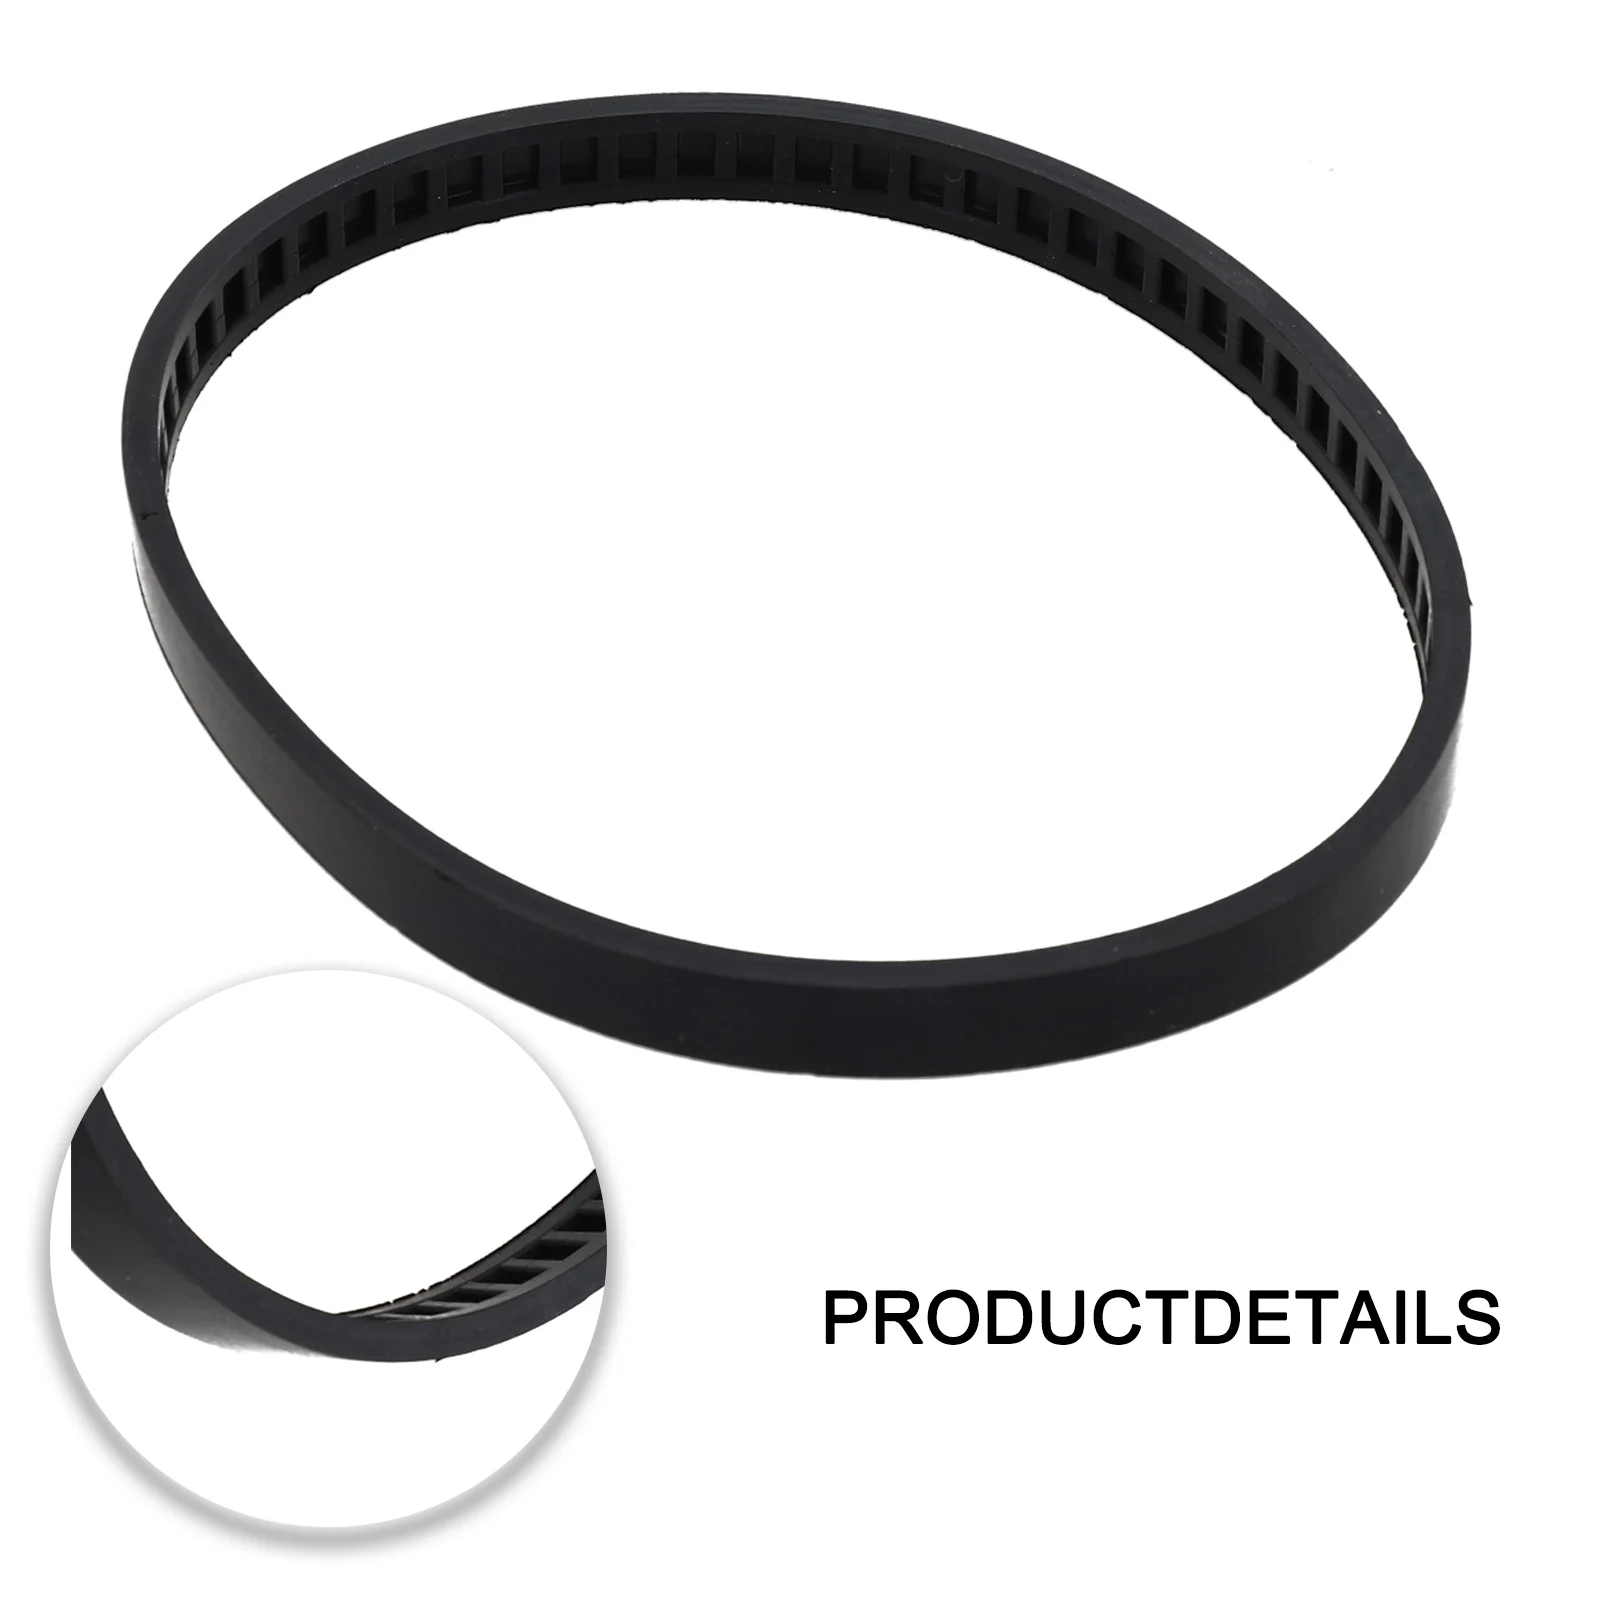 45-69-0010 Blade Pulley Tire For Milwaukee Bandsaw Part Deep Cutting Blades Balck Elastic Rubber Belt For Bandsaw Blade belt pulley xl 24t bore 6 6 35 8 10 12 12 7 14 15 16 17 18 19 20mm alloy toothed pulley teeth pitch 5 08mm for xl rubber belt